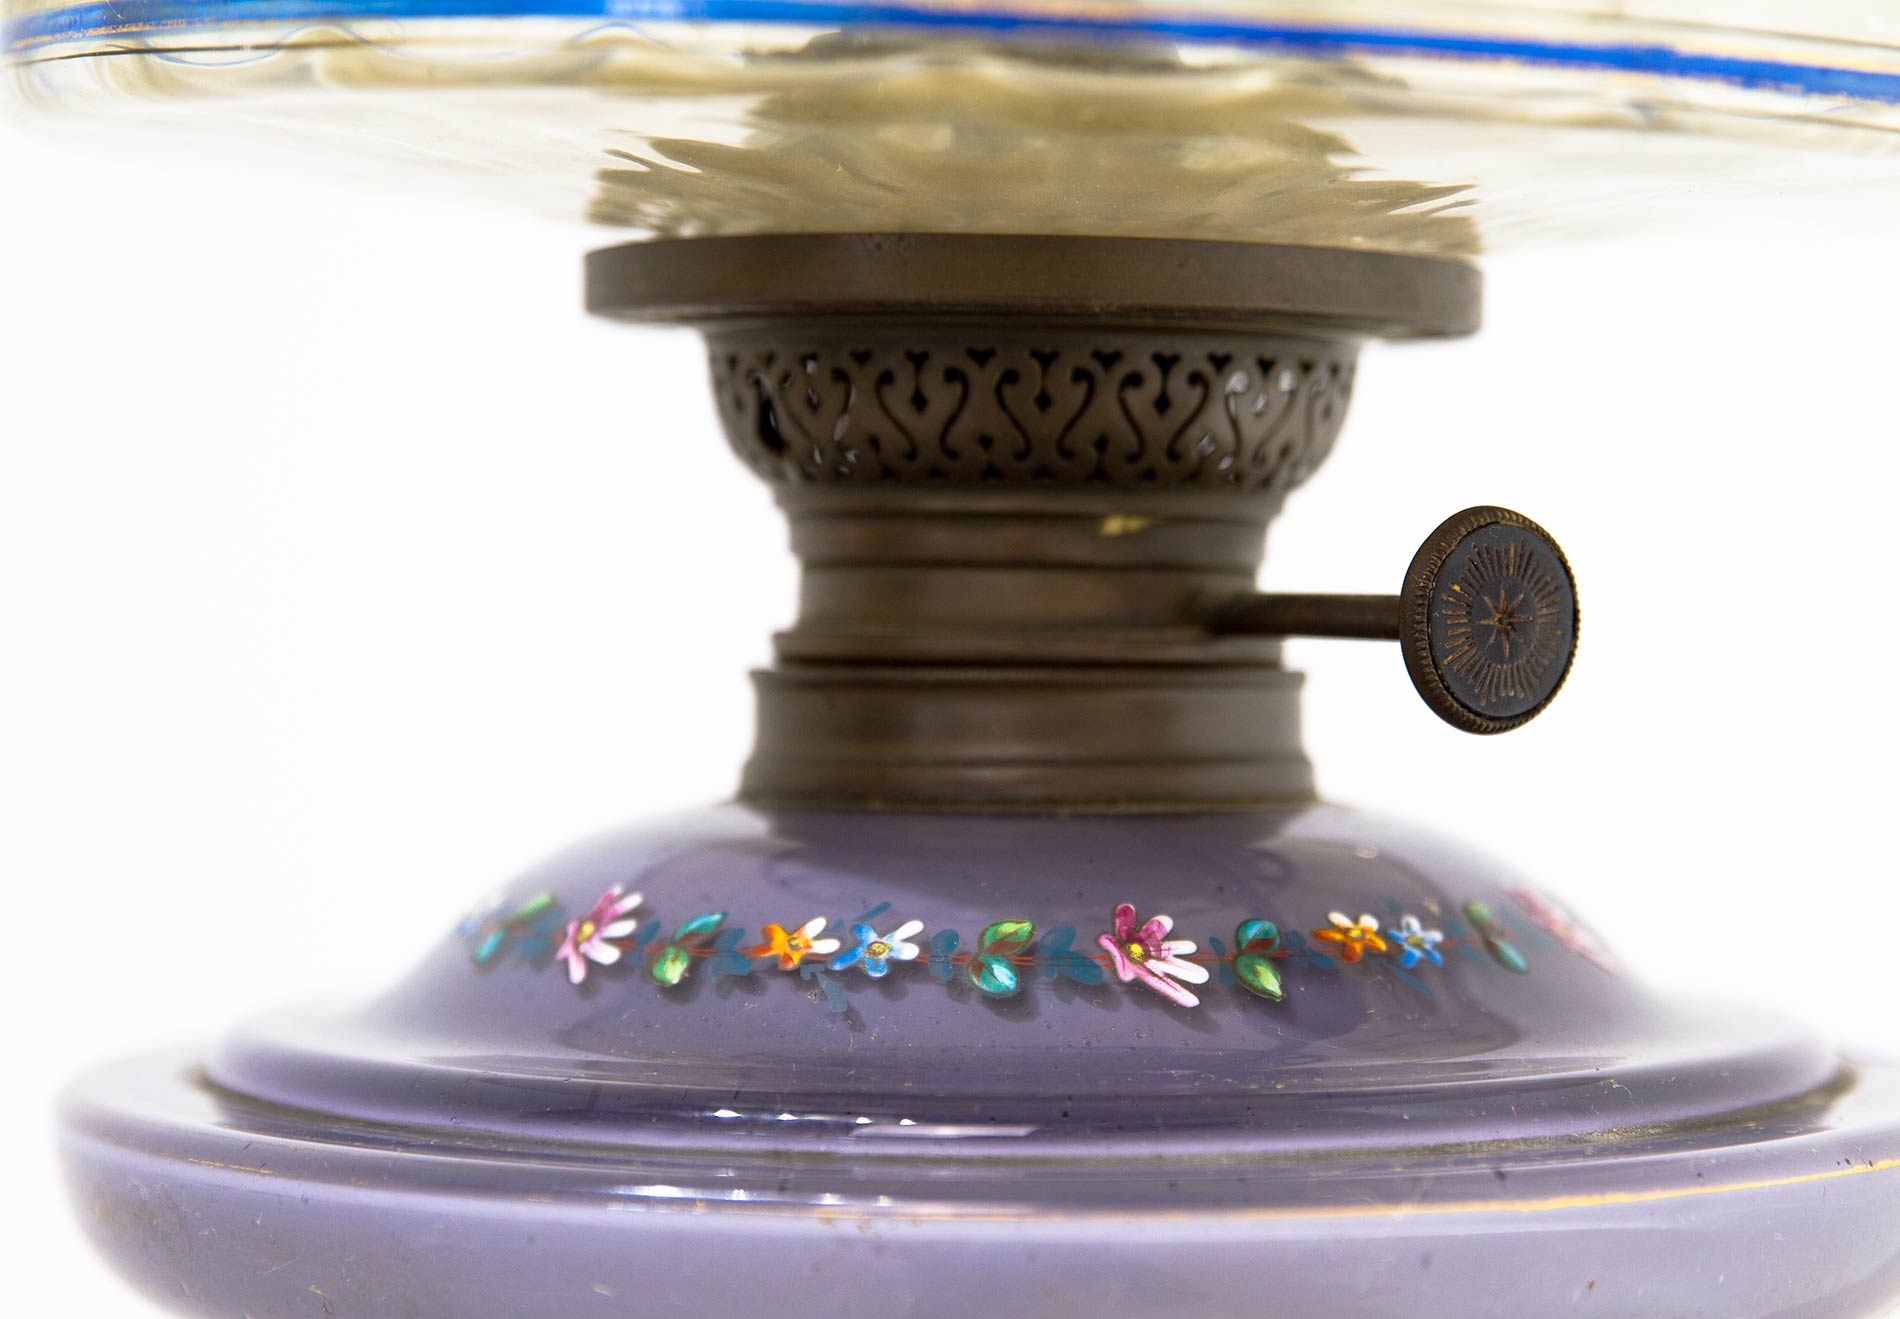 Petrol lamp in opaline, with varnished decorations and painted glass goblet. 19th century. H 75cm - Image 4 of 6